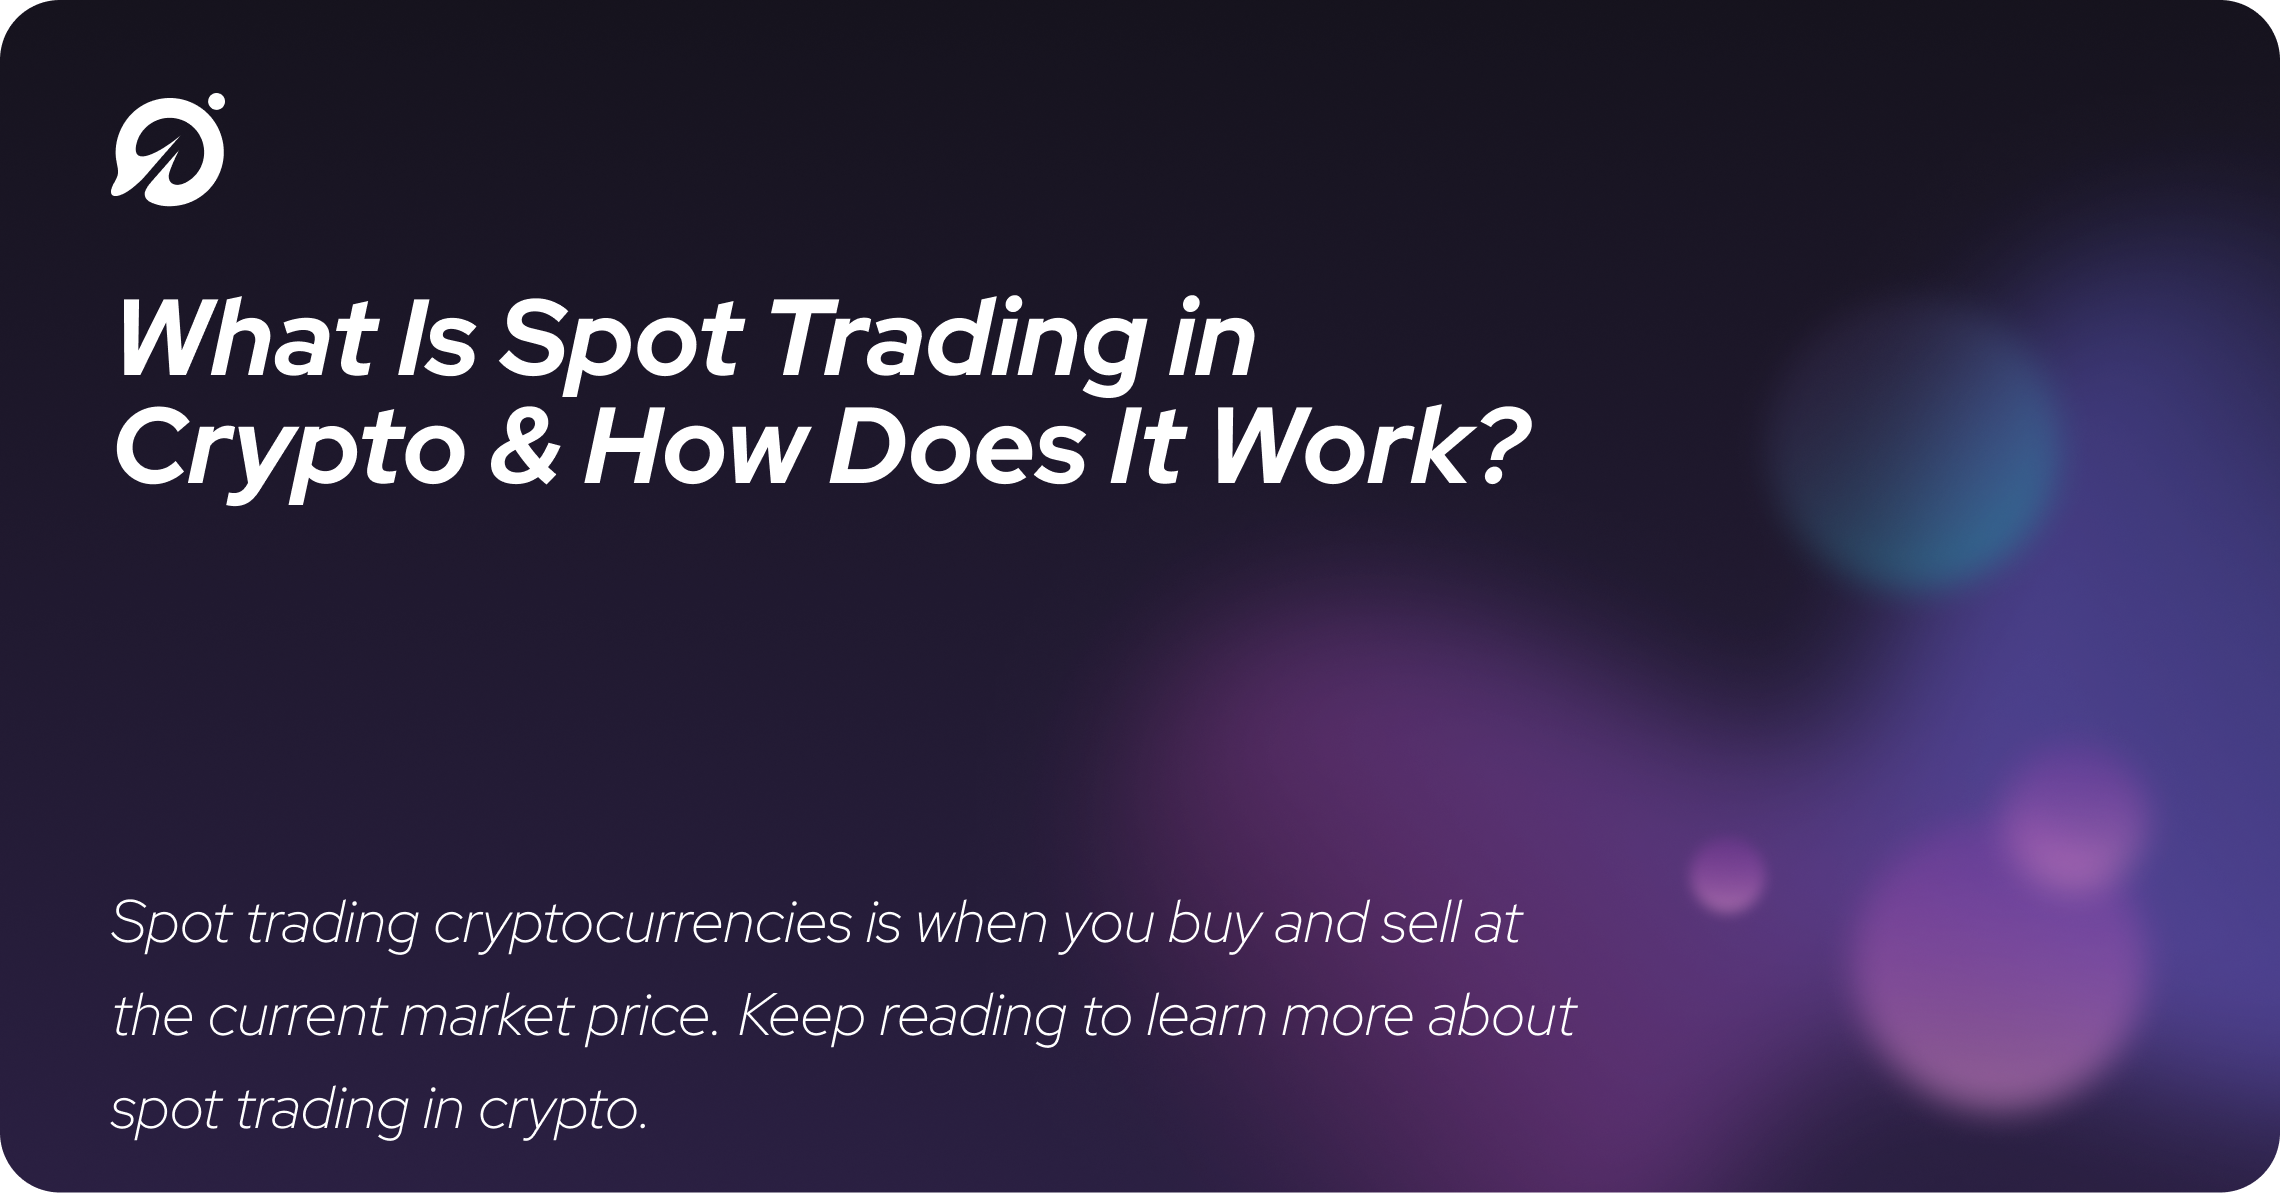 What Is Spot Trading in Crypto & How Does It Work?